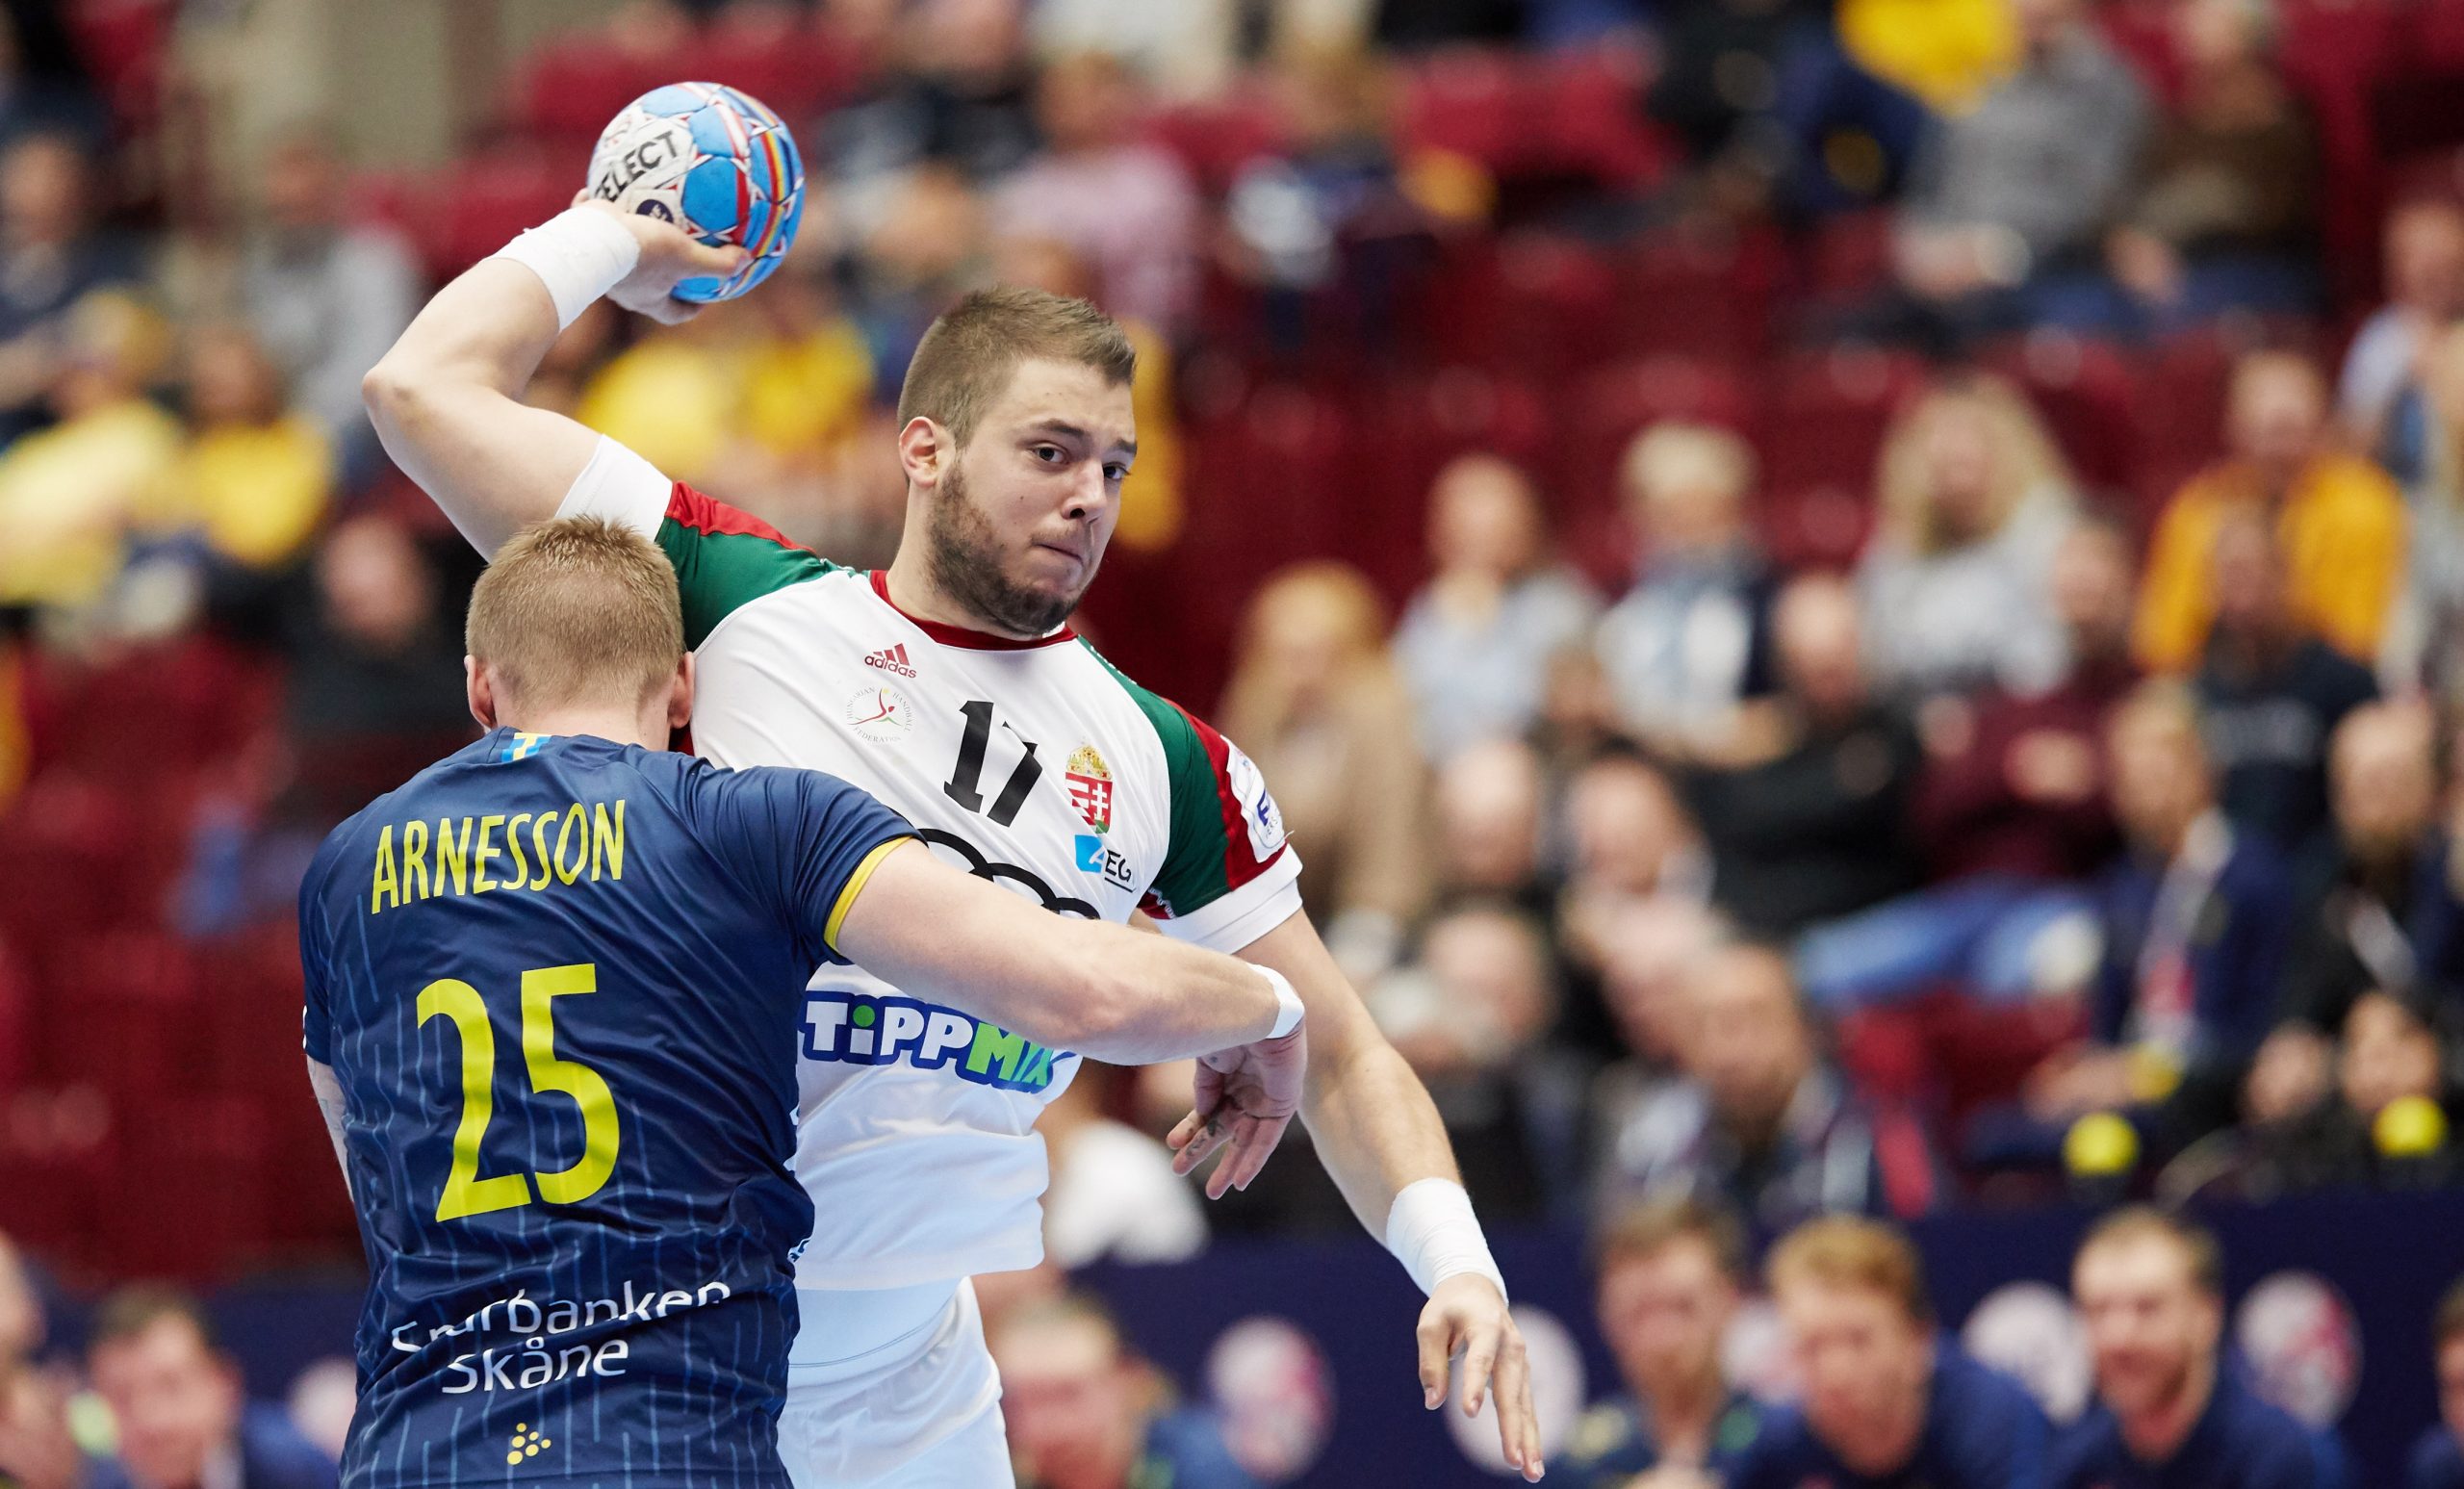 epa08148605 Hungary's Bence Nagy (R) against Swedens Linus Arnesson during the Men's European Handball Championship main round Group 2 match between Hungary and Sweden at Malmo Arena in Malmo, Sweden, 21 January 2020.  EPA/ANDREAS HILLERGREN  SWEDEN OUT